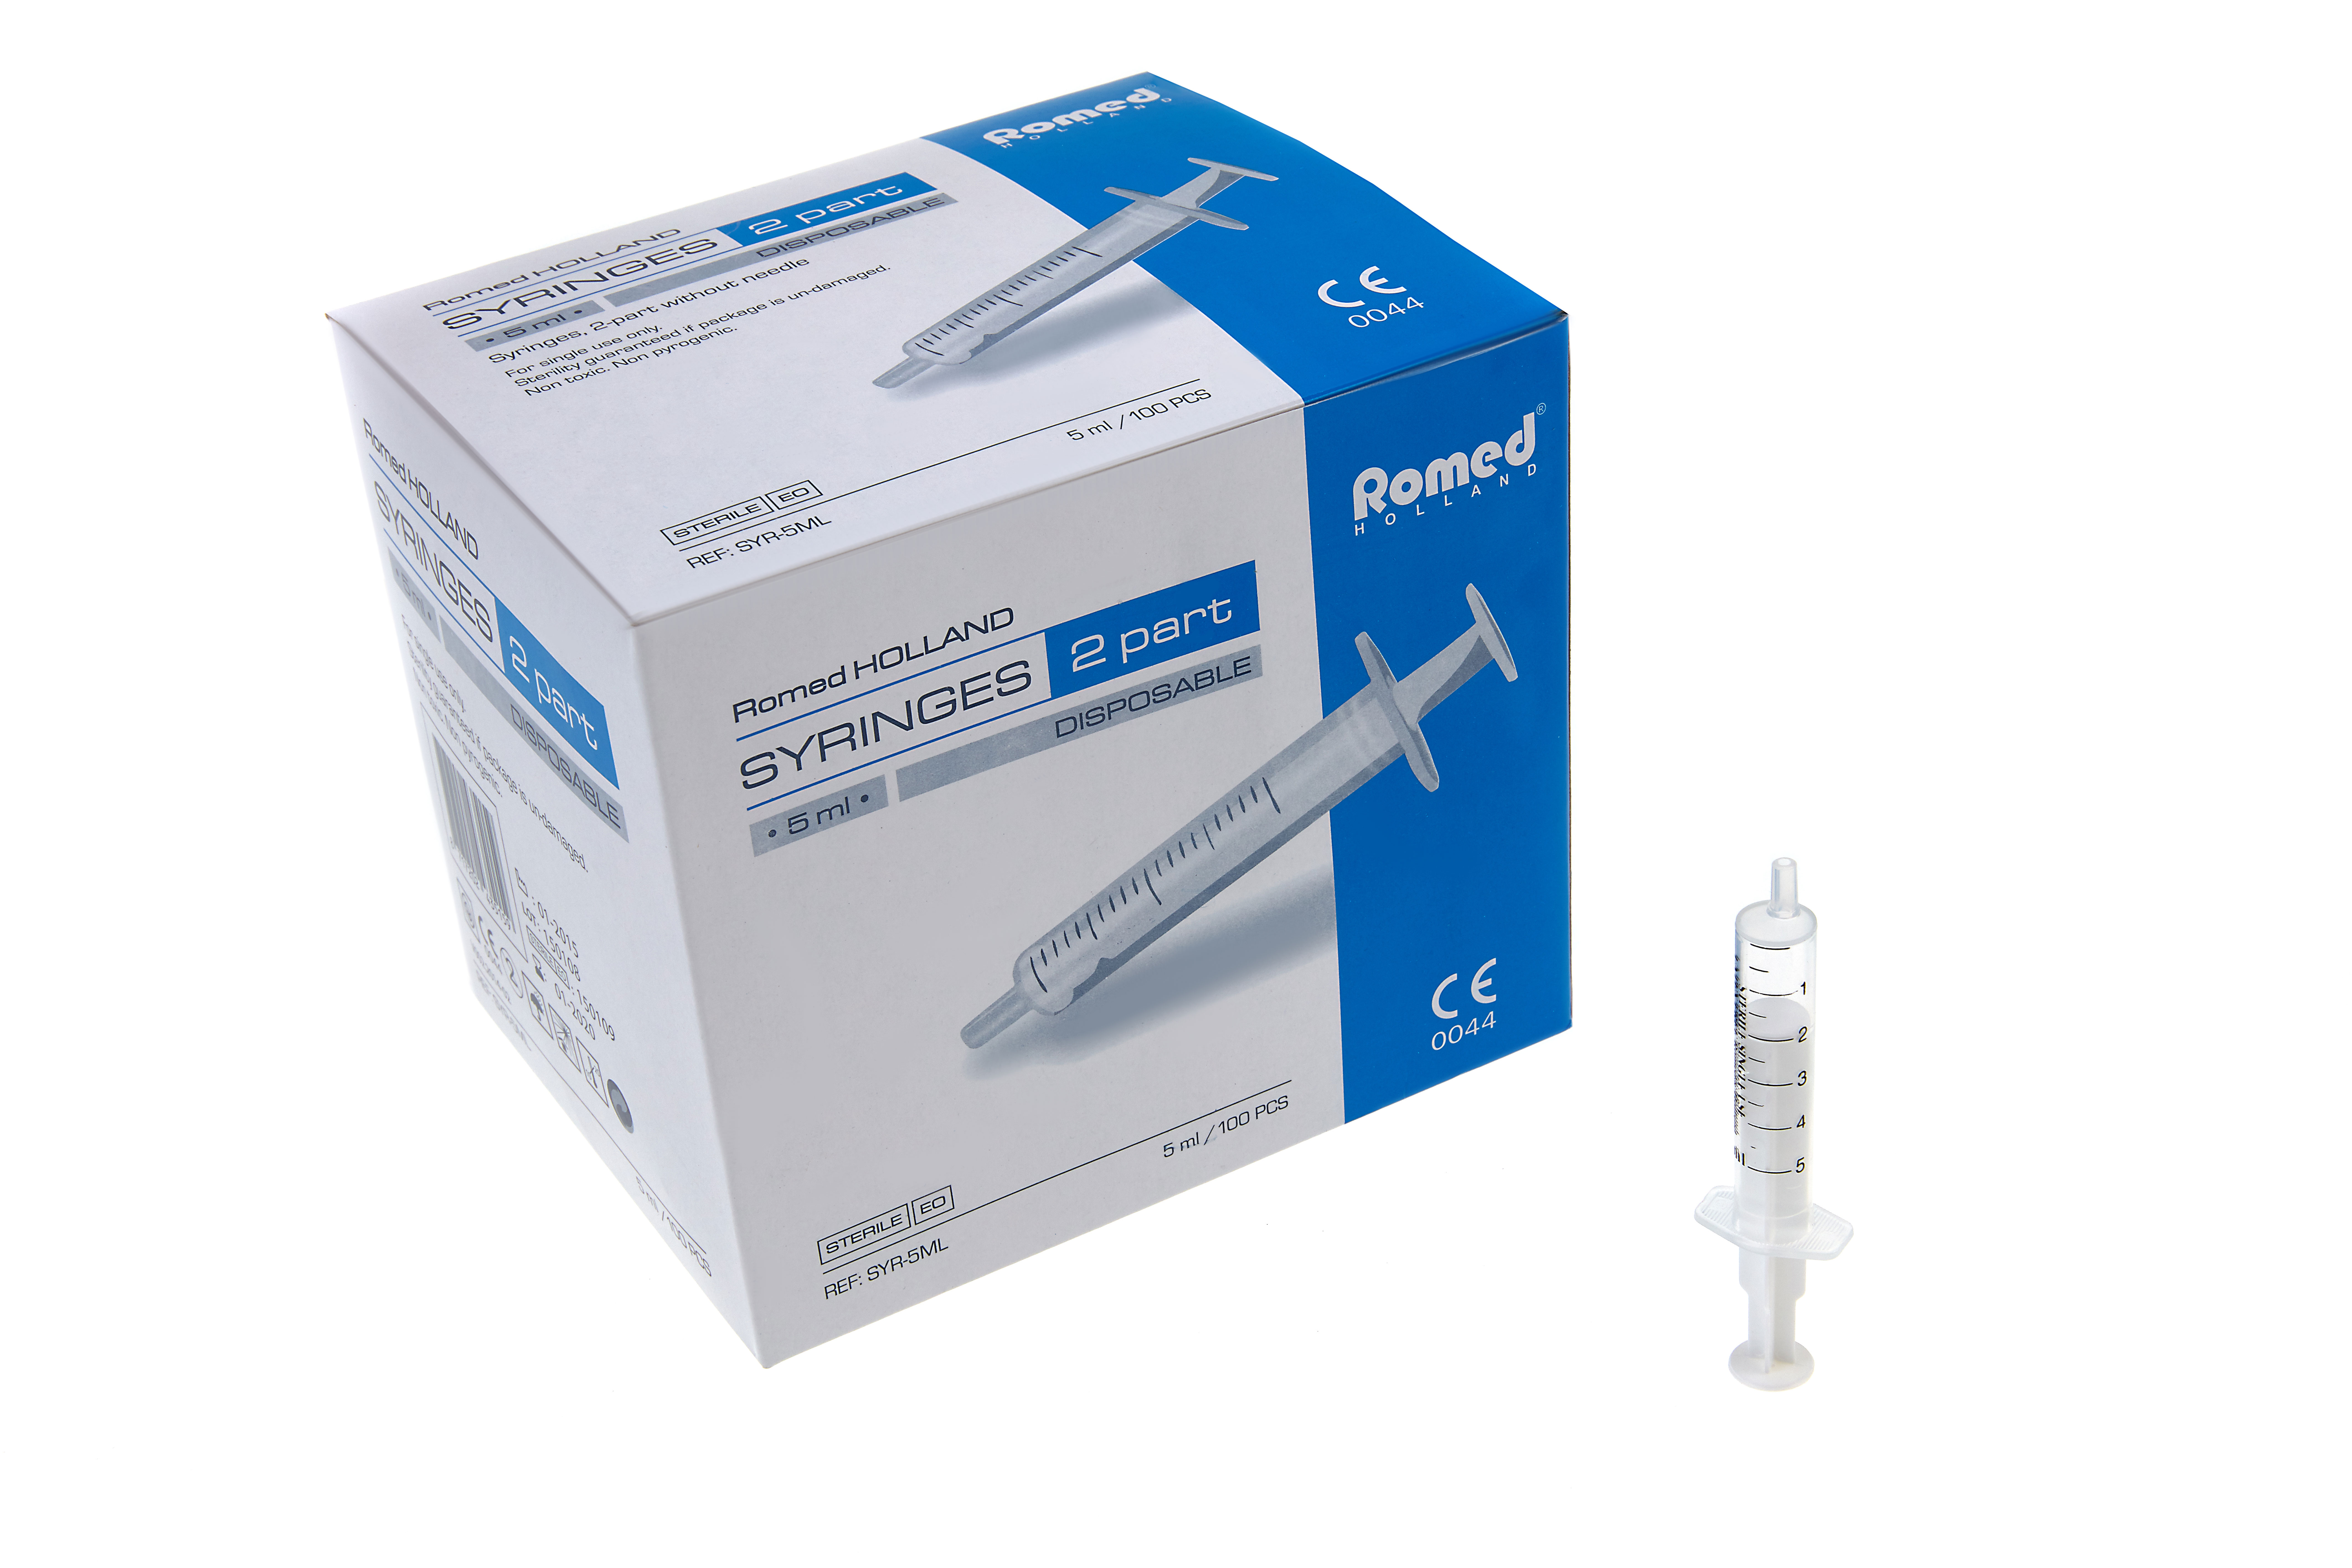 SYR-2ML Romed 2-part syringes 2ml, without needle, sterile per piece, 100 pcs in an inner box, 30 x 100 pcs = 3.000 pcs in a carton.